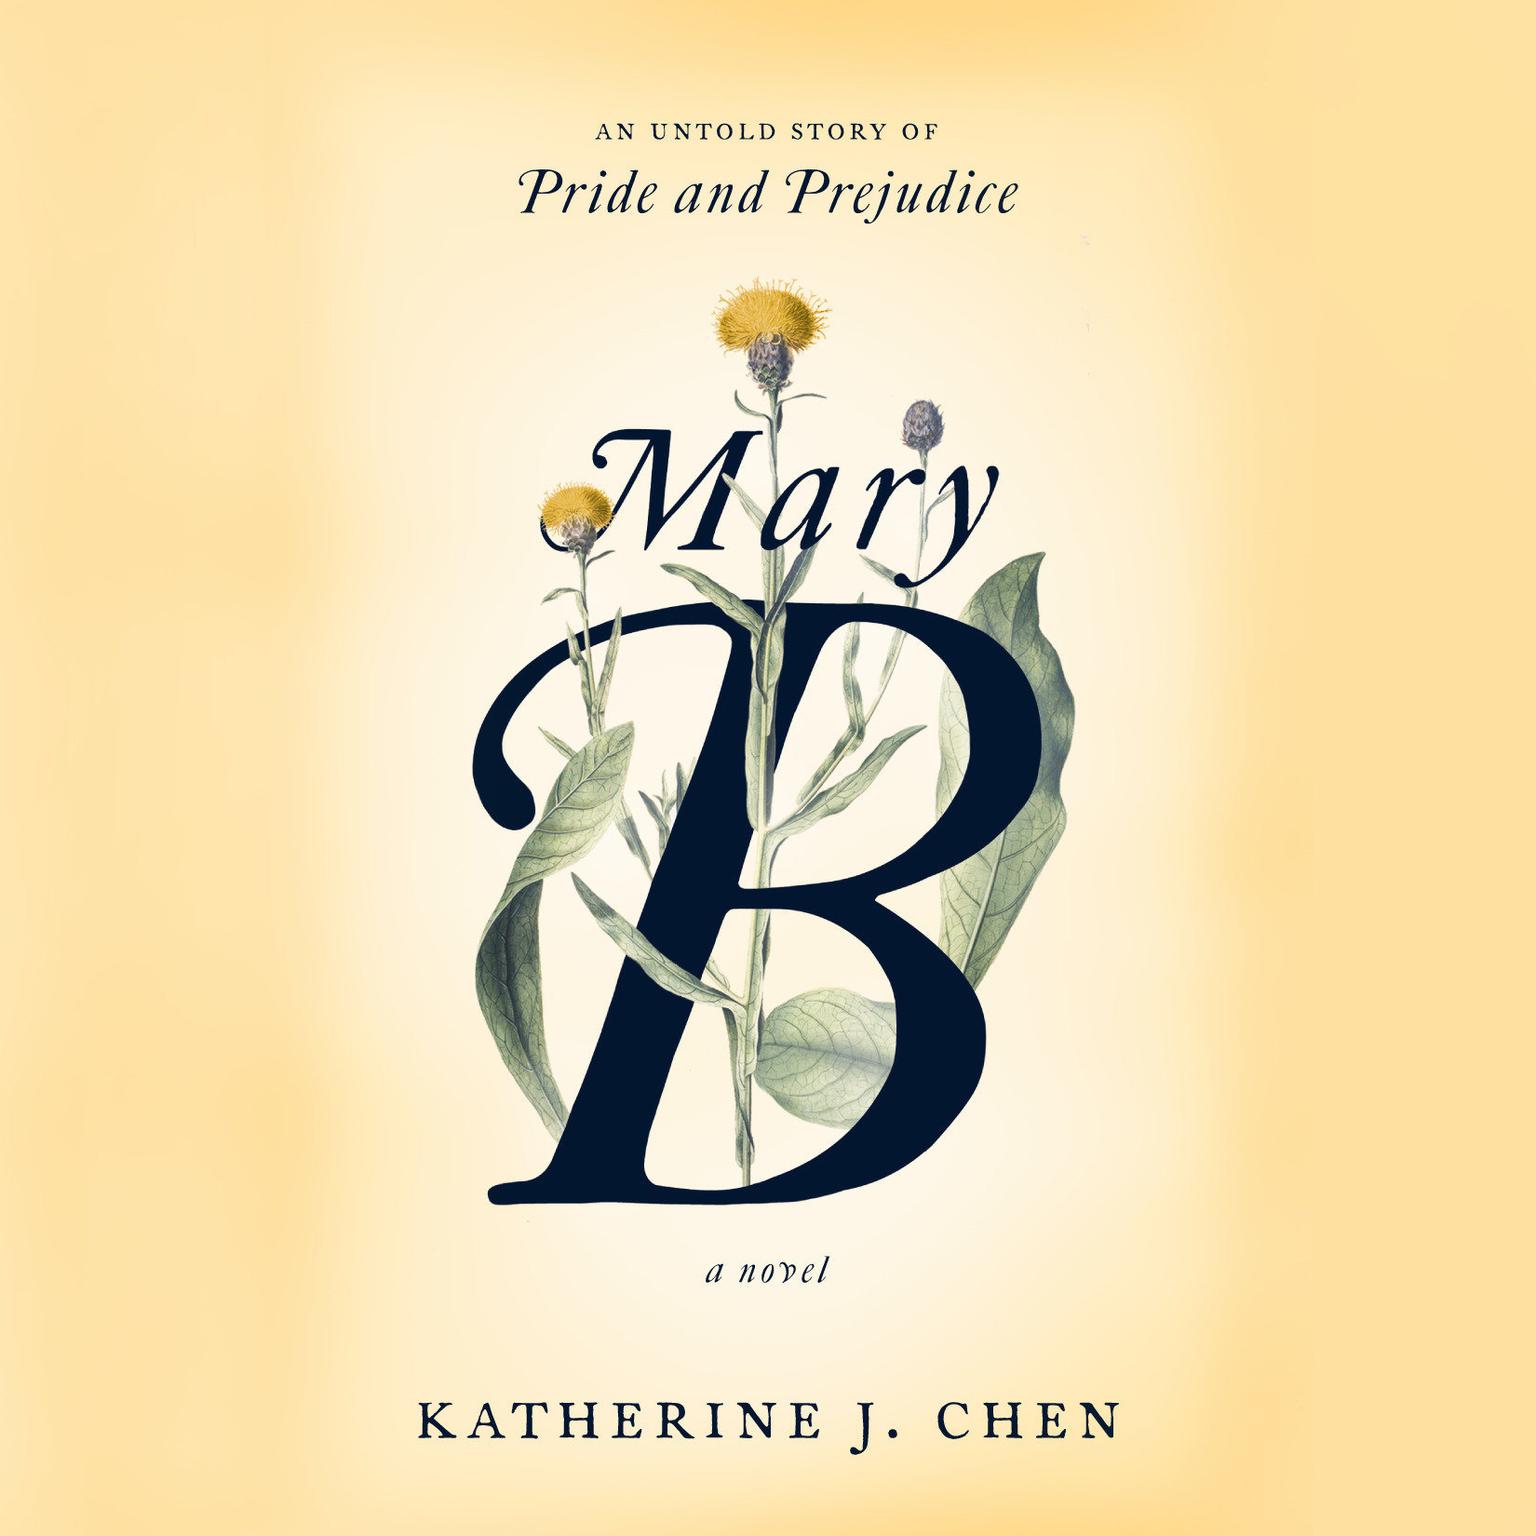 Mary B: A Novel: An untold story of Pride and Prejudice Audiobook, by Katherine J. Chen